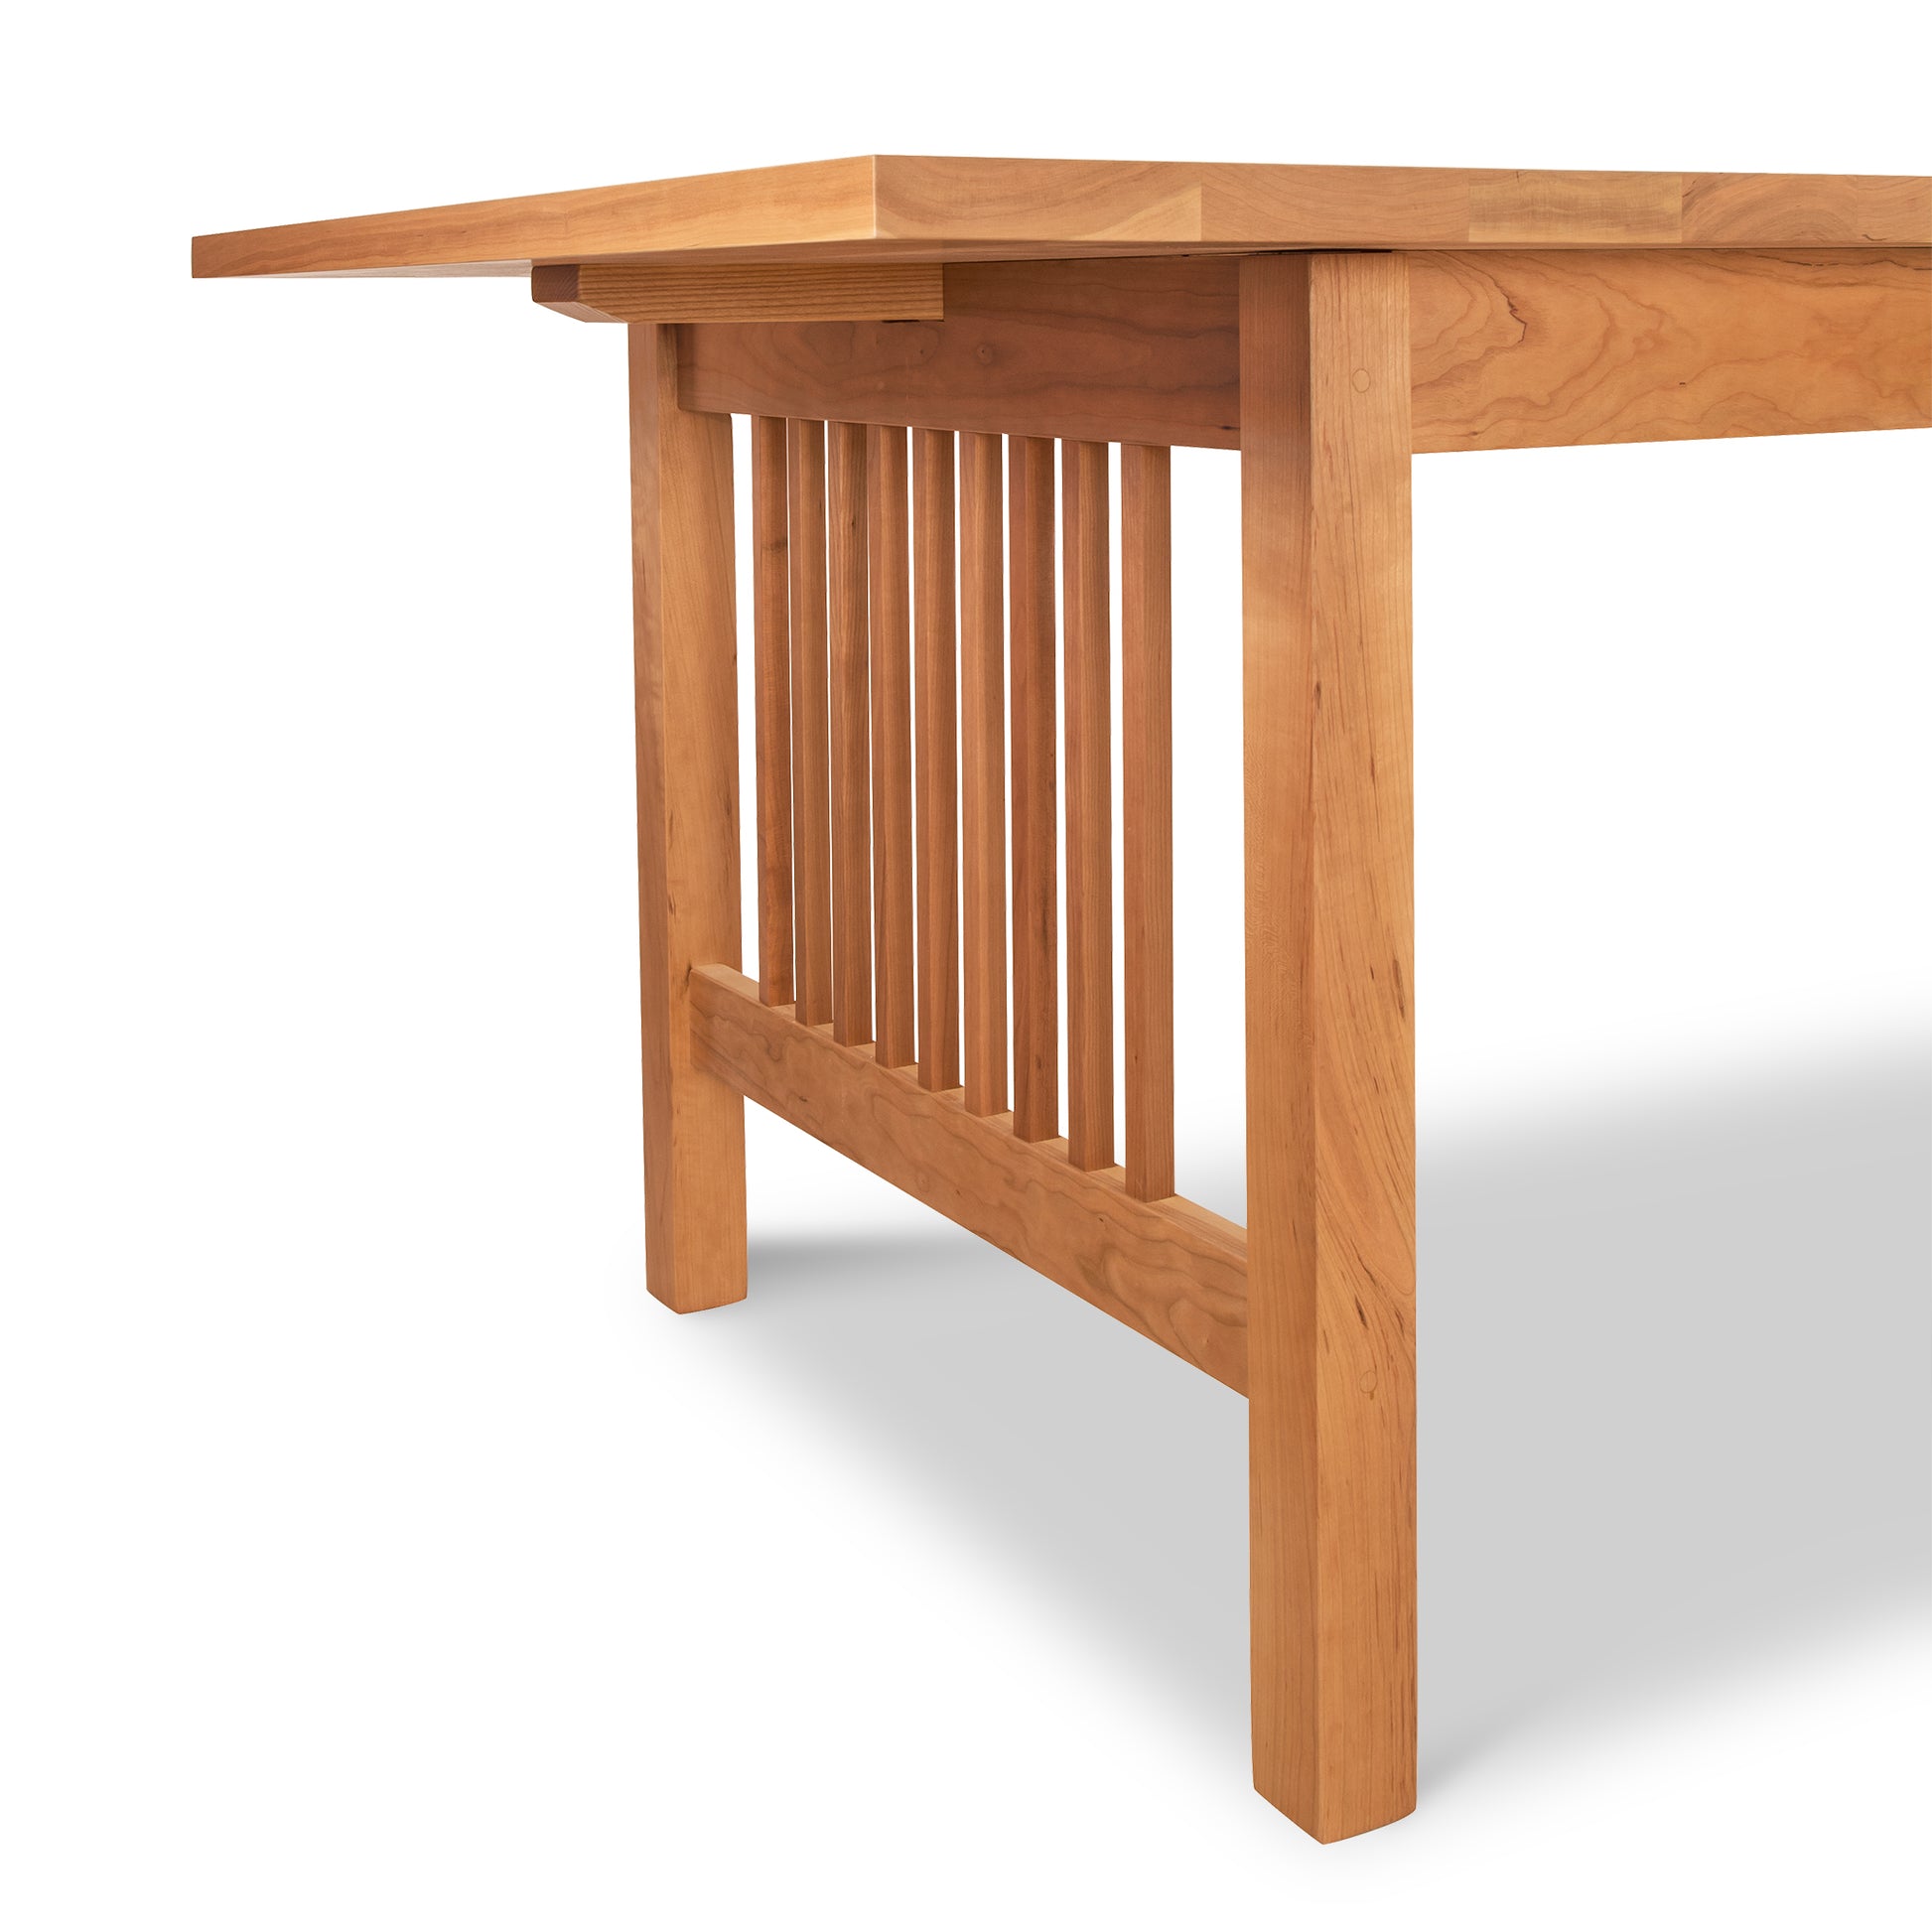 A solid natural wood American Mission Extension dining table with a wooden top by Lyndon Furniture.